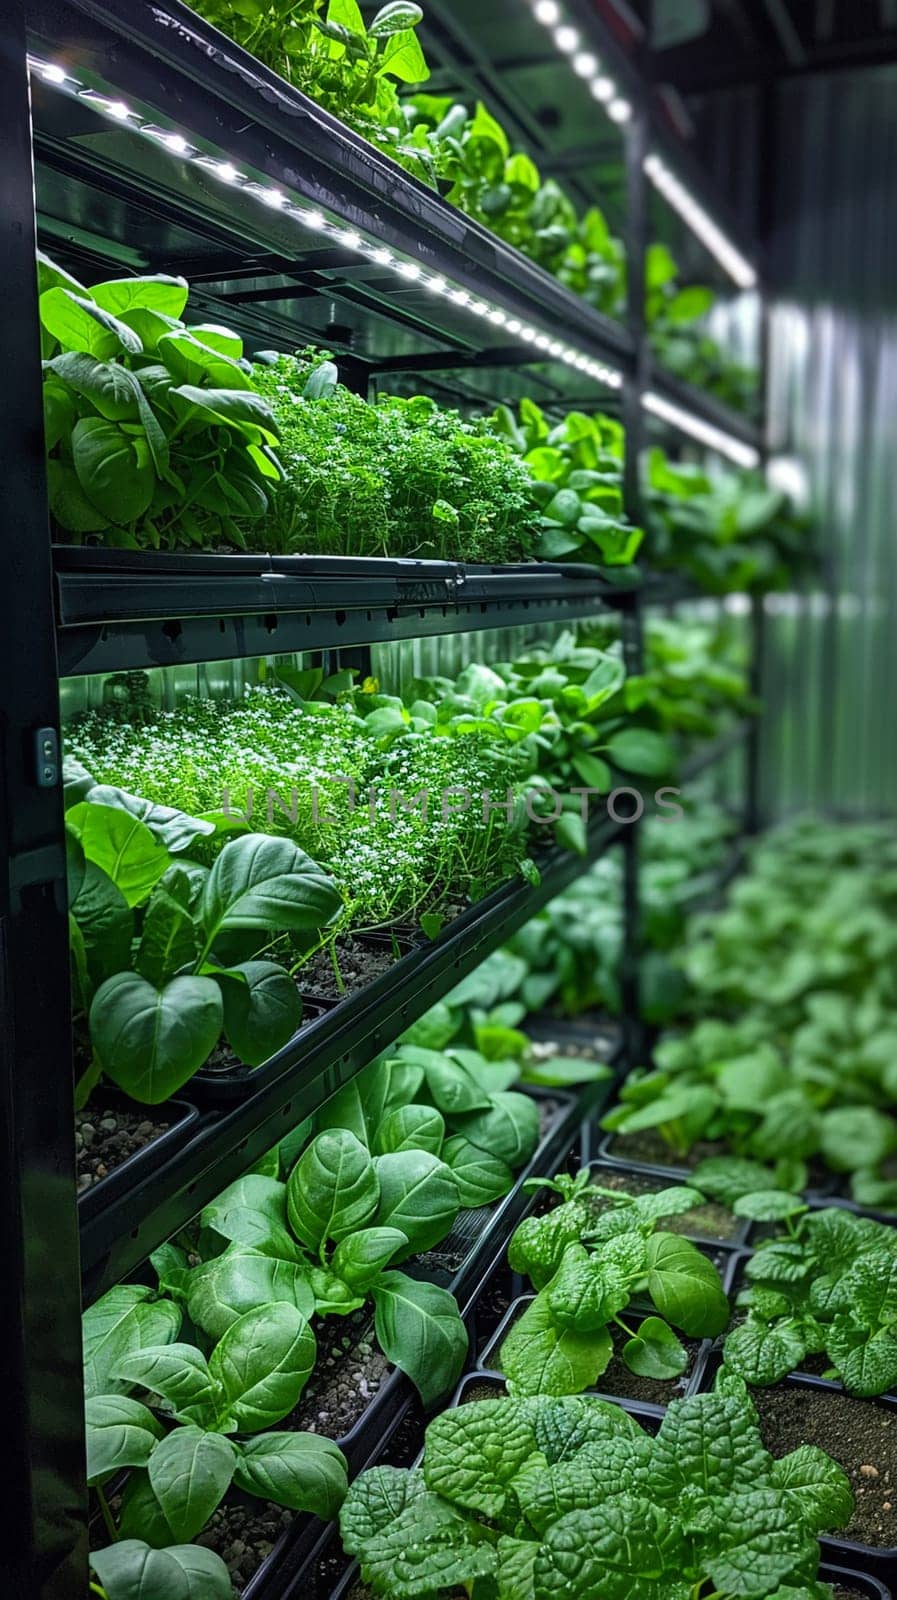 Aquaponics Innovation Leads Aquaculture in Business of Eco-Farming Futures, Aquaponic systems and green technology lead a story of aquaculture innovation and eco-farming futures in the aquaponics business.